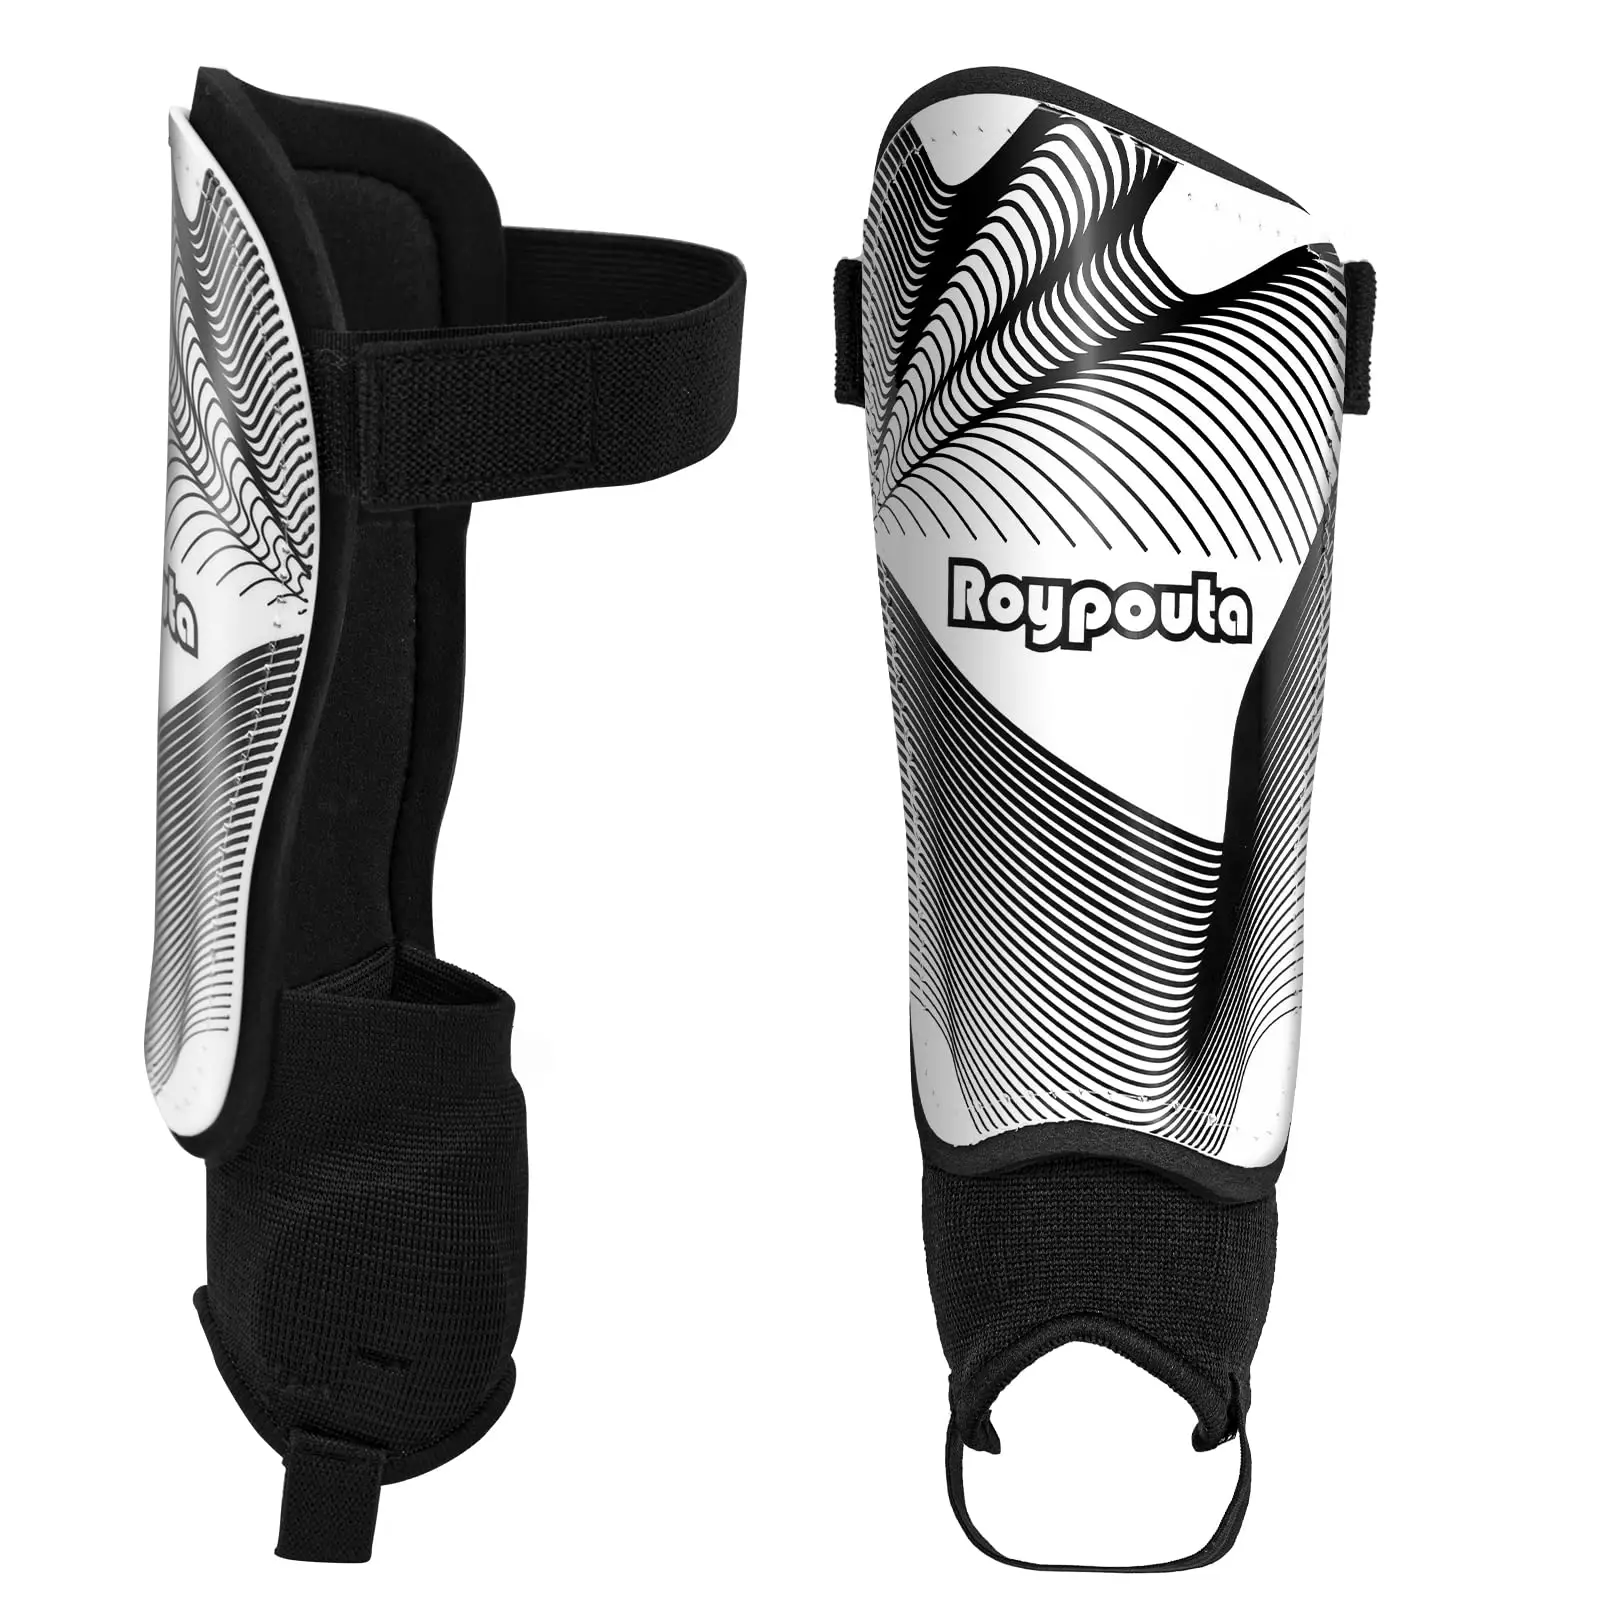 ROYPOUTA Shin Guards Soccer Youth with Ankle Protection